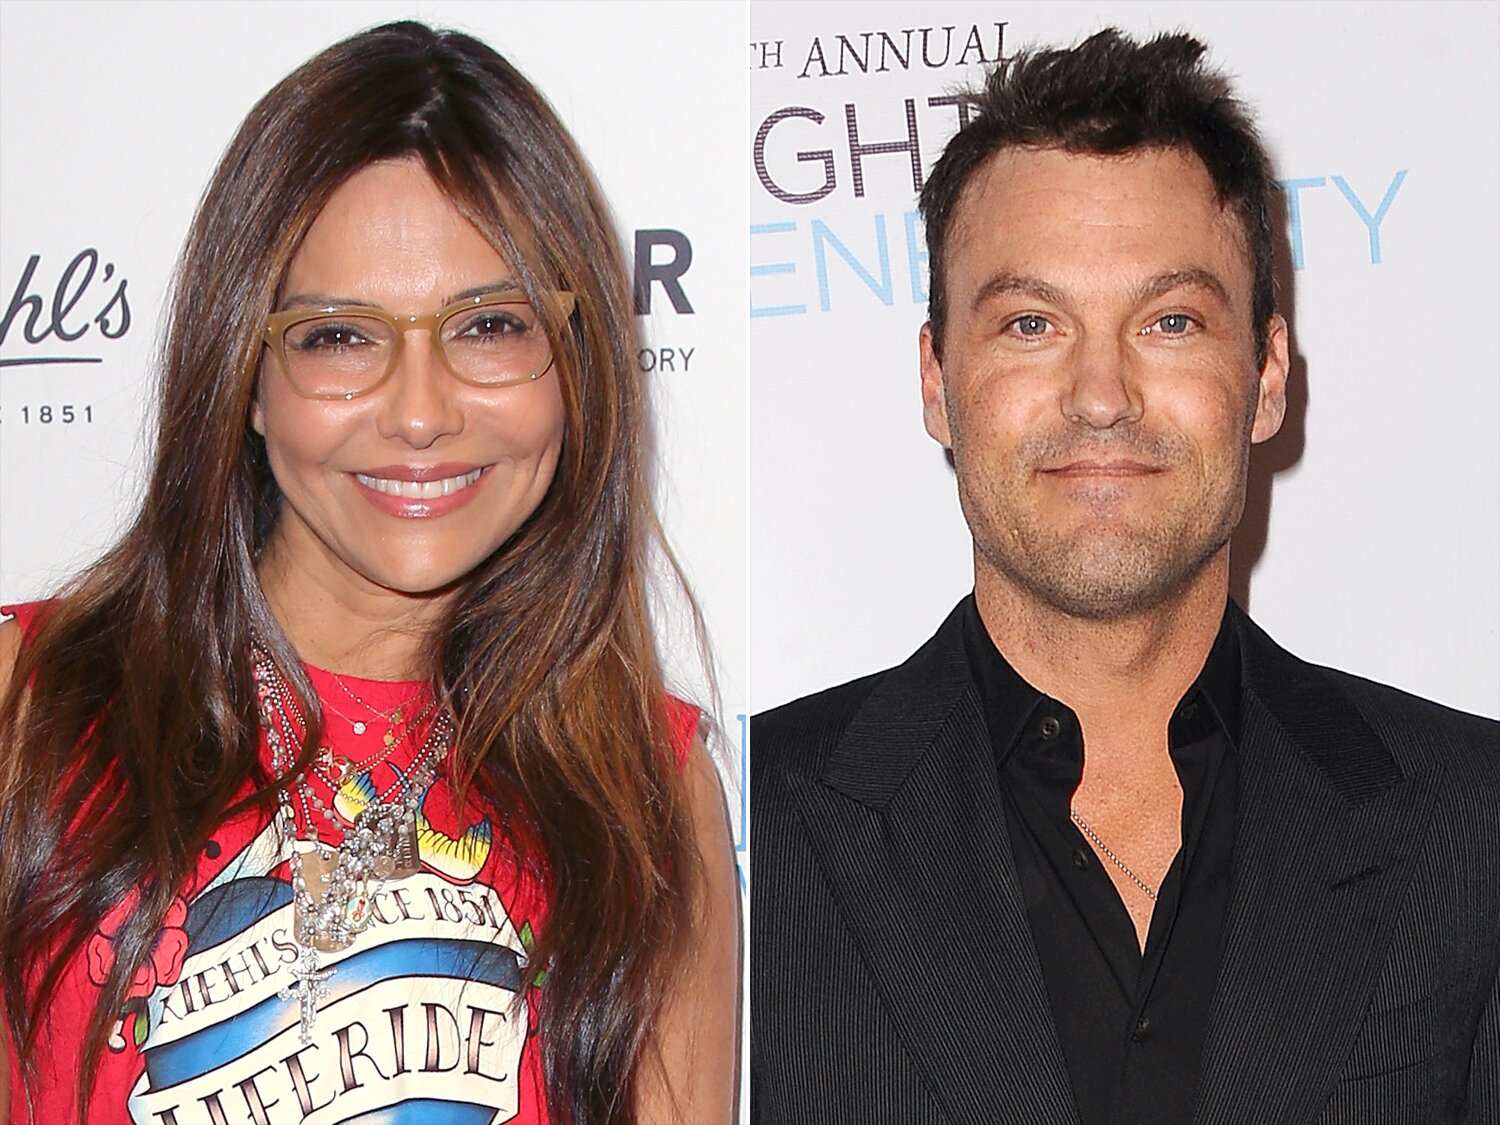 Dancing With The Stars Brian Austin Green Support From Ex Vanessa Marcil! DWTS